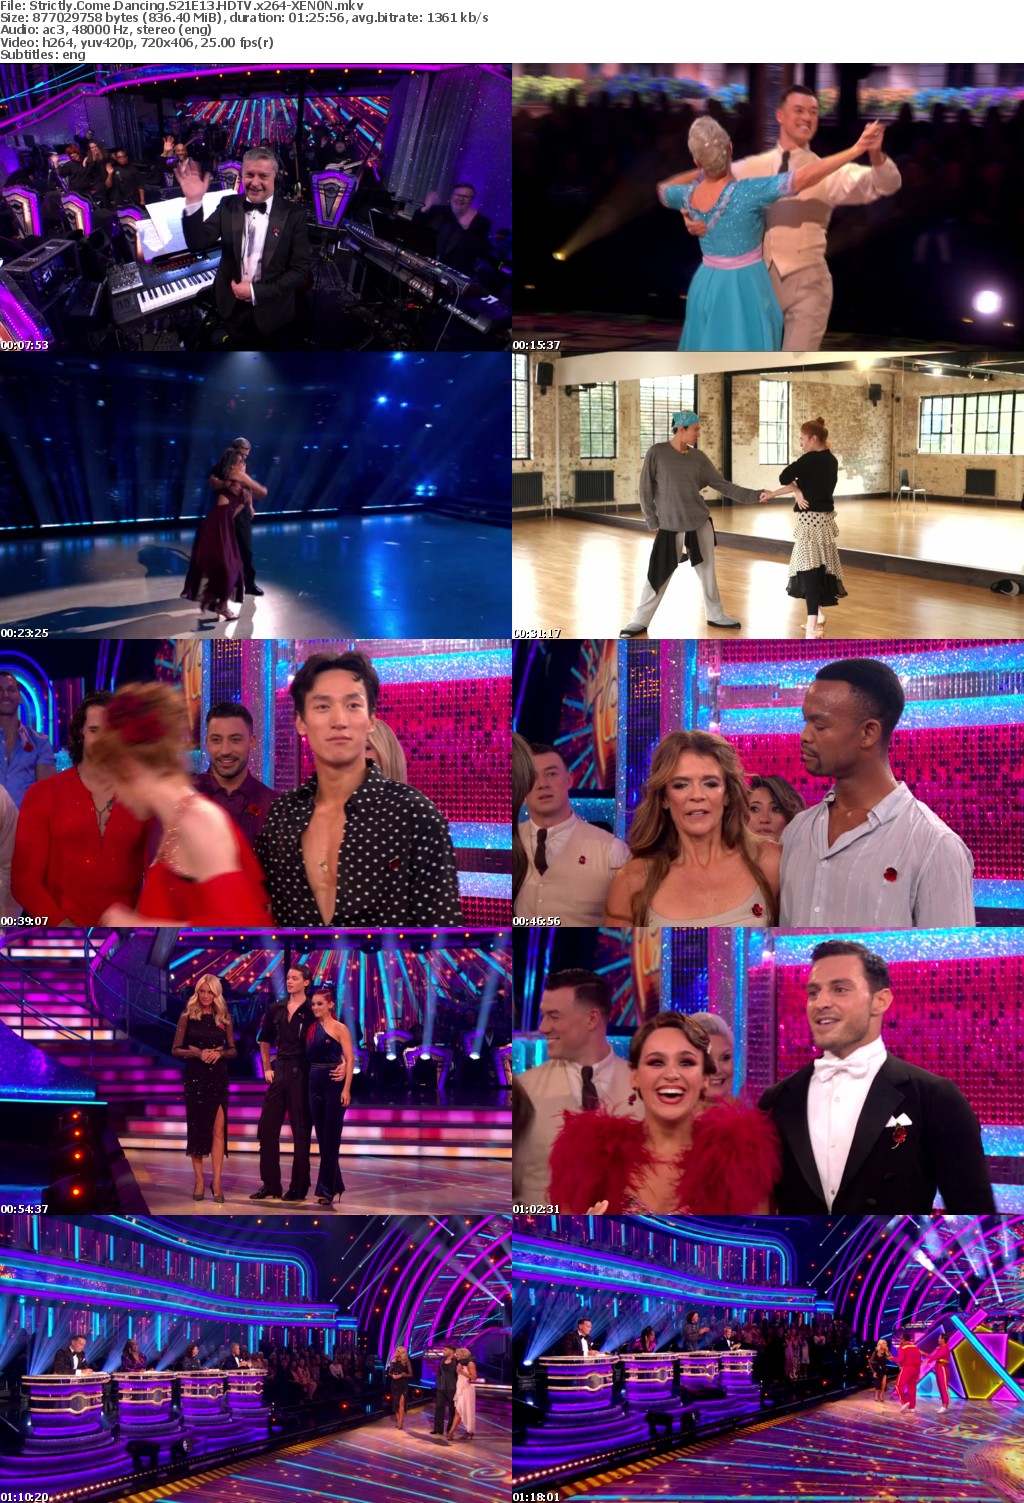 Strictly Come Dancing S21E13 HDTV x264-XEN0N